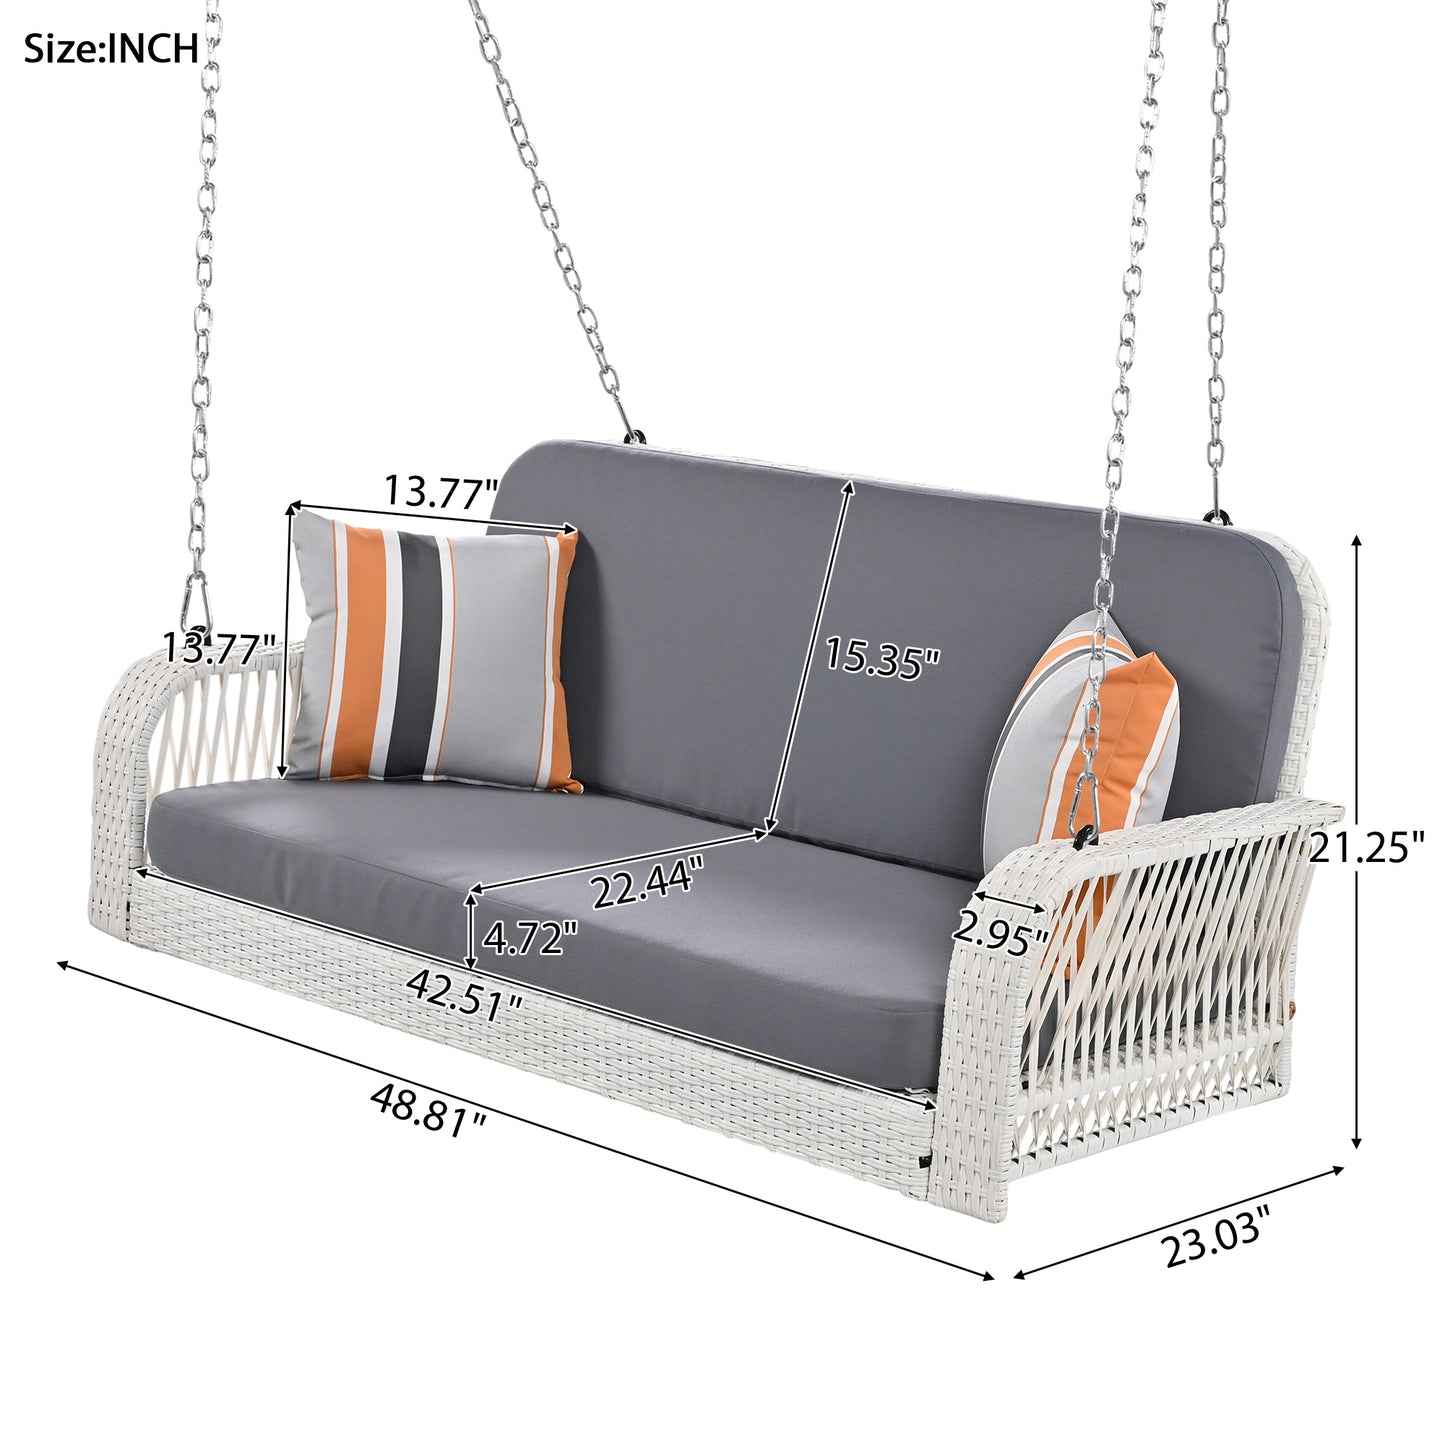 GO PE Wicker Porch Swing, 2-Seater Hanging Bench With Chains, Patio Furniture Swing For Backyard Garden Poolside, White And Gray